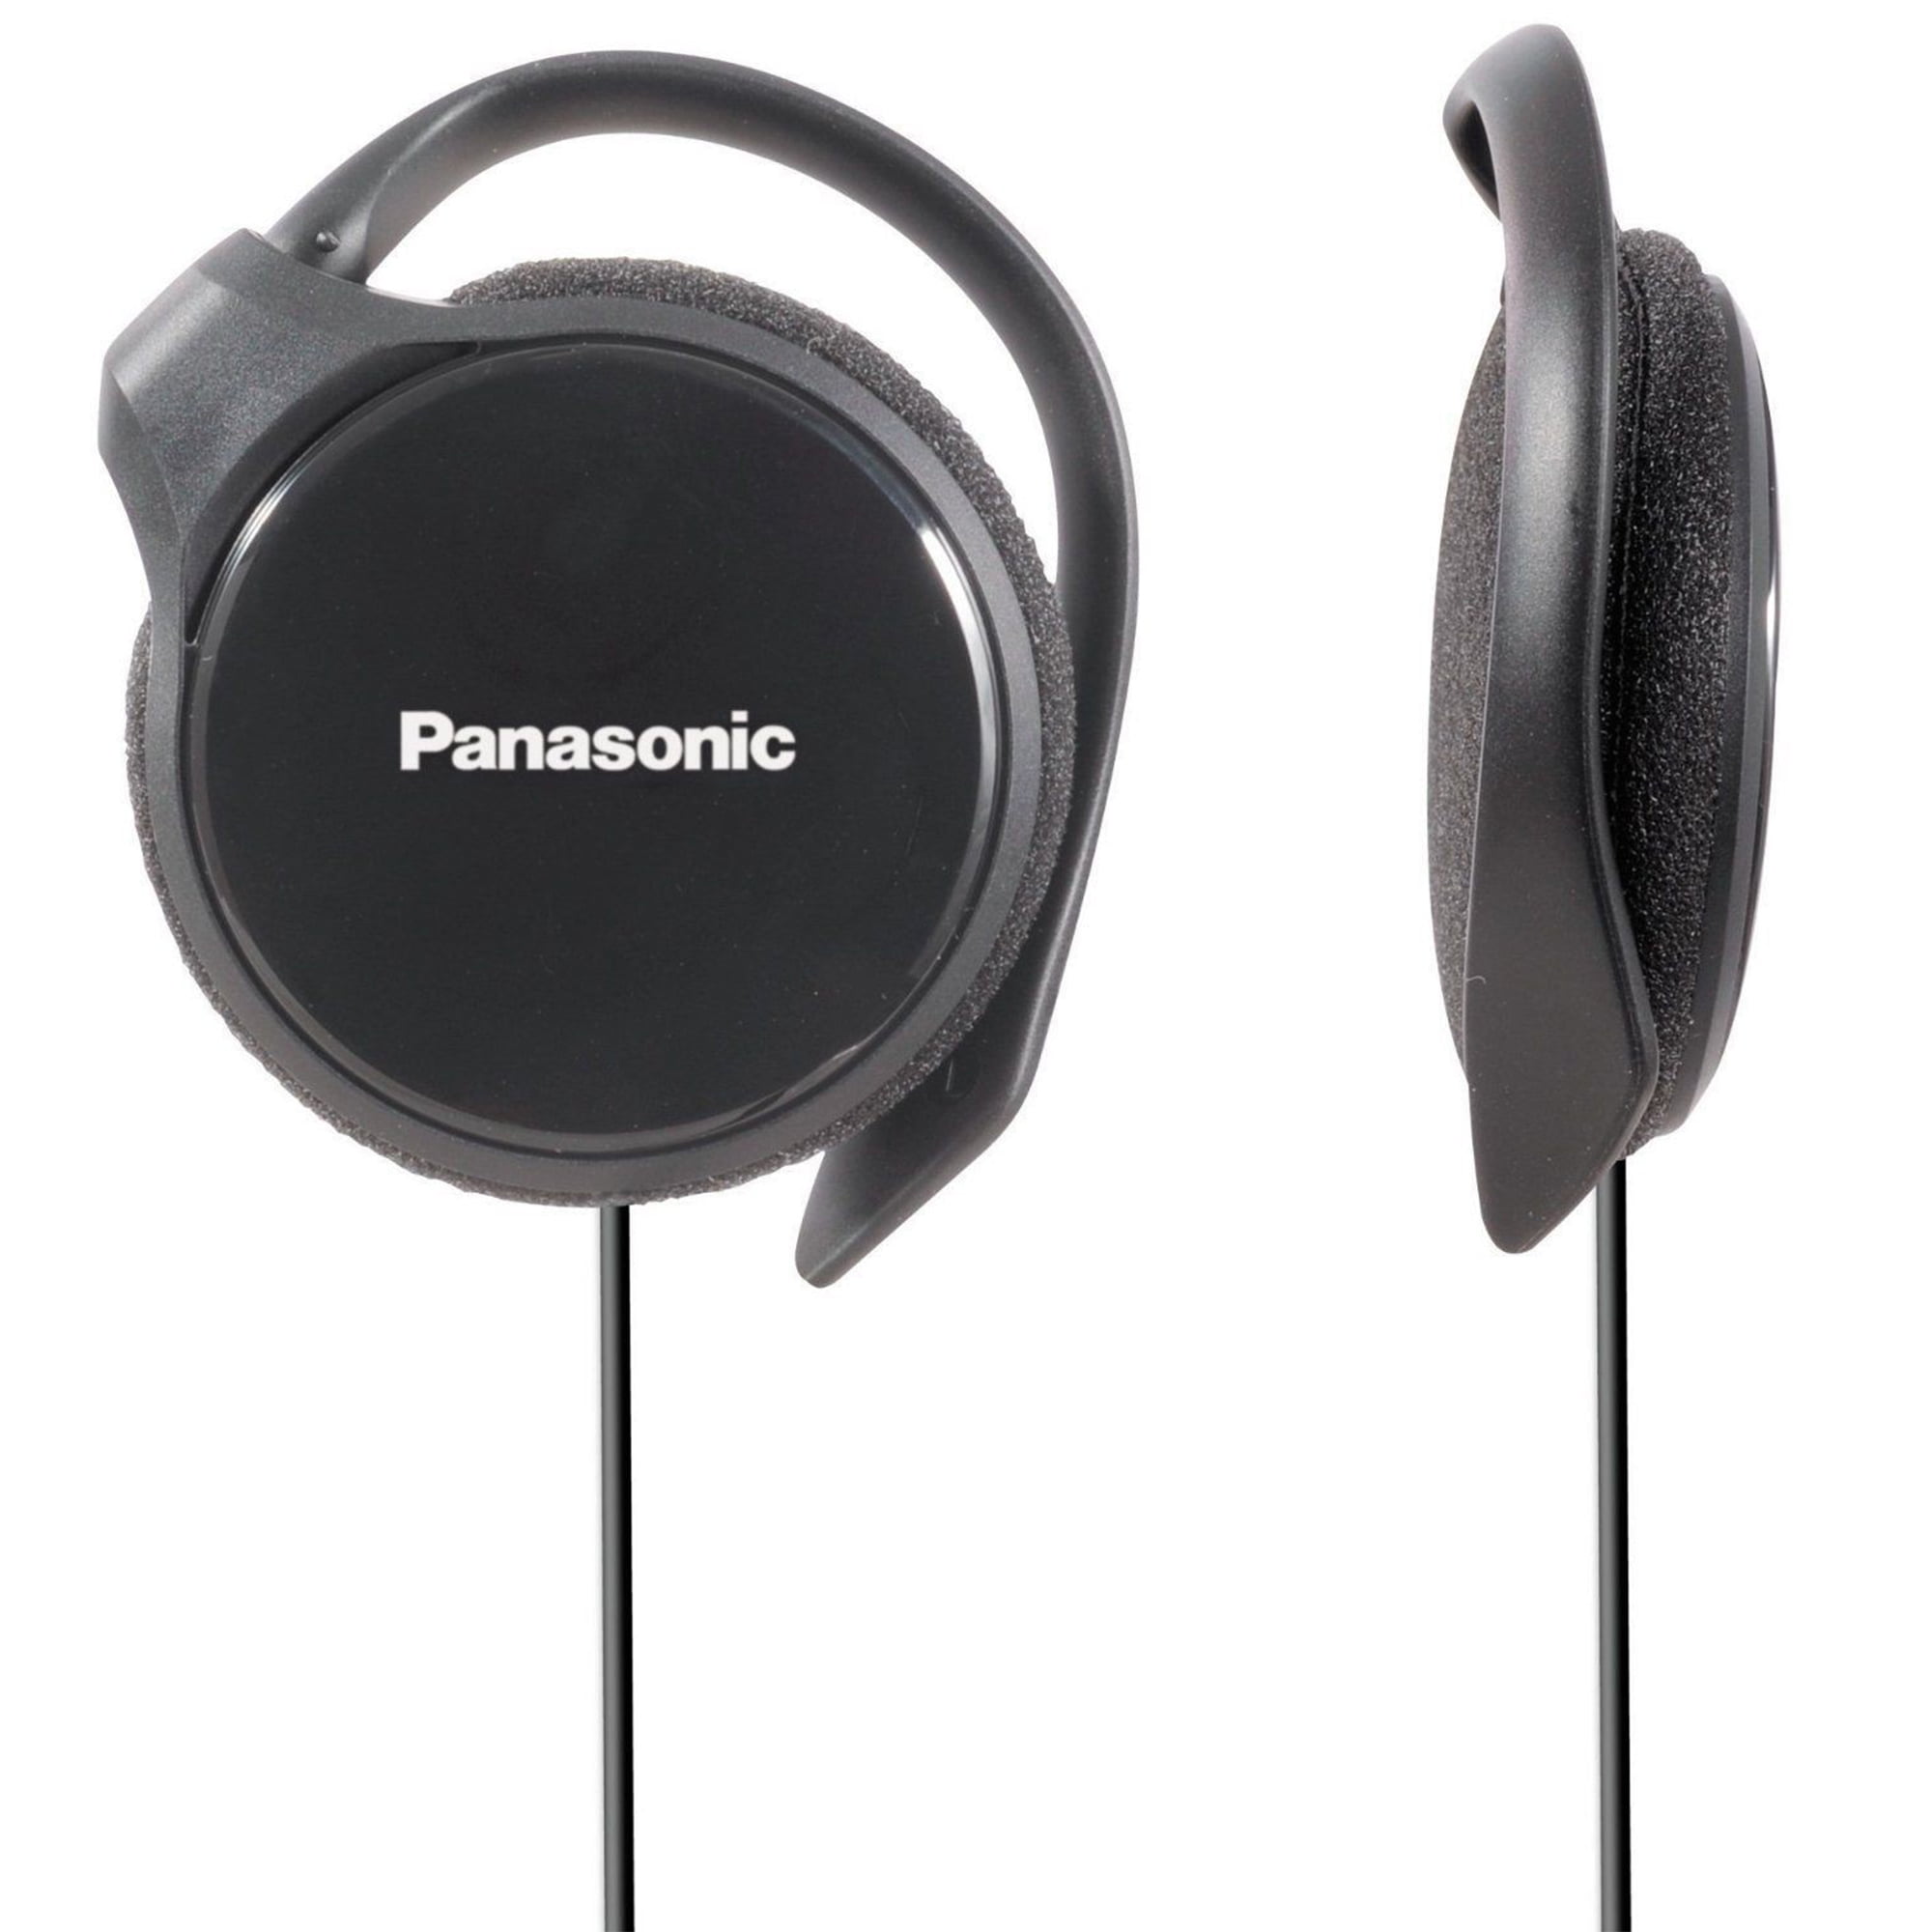 RPHS46 Ultra Ear Lightweight With Stereo Slim Housing On Panasonic Wired Clip Headphone Black